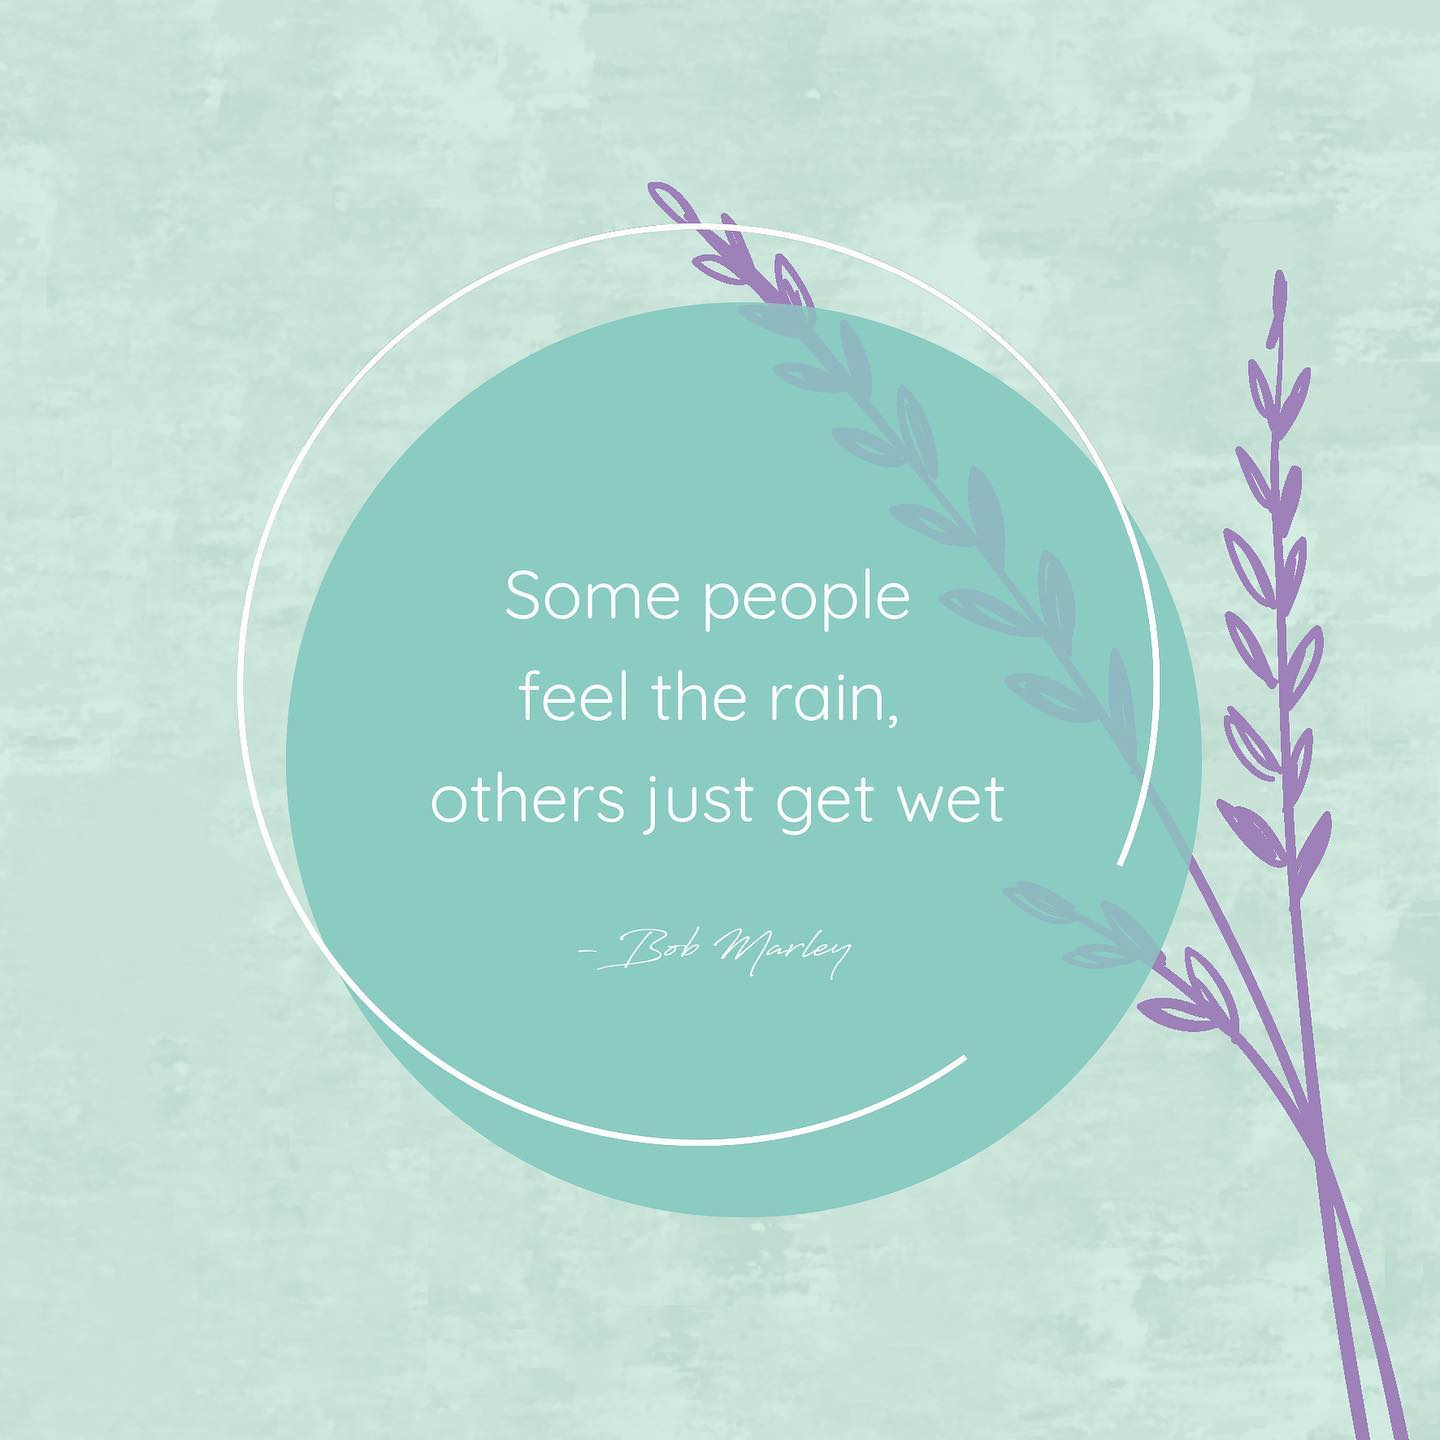 “Some people feel the rain, others just get wet.”